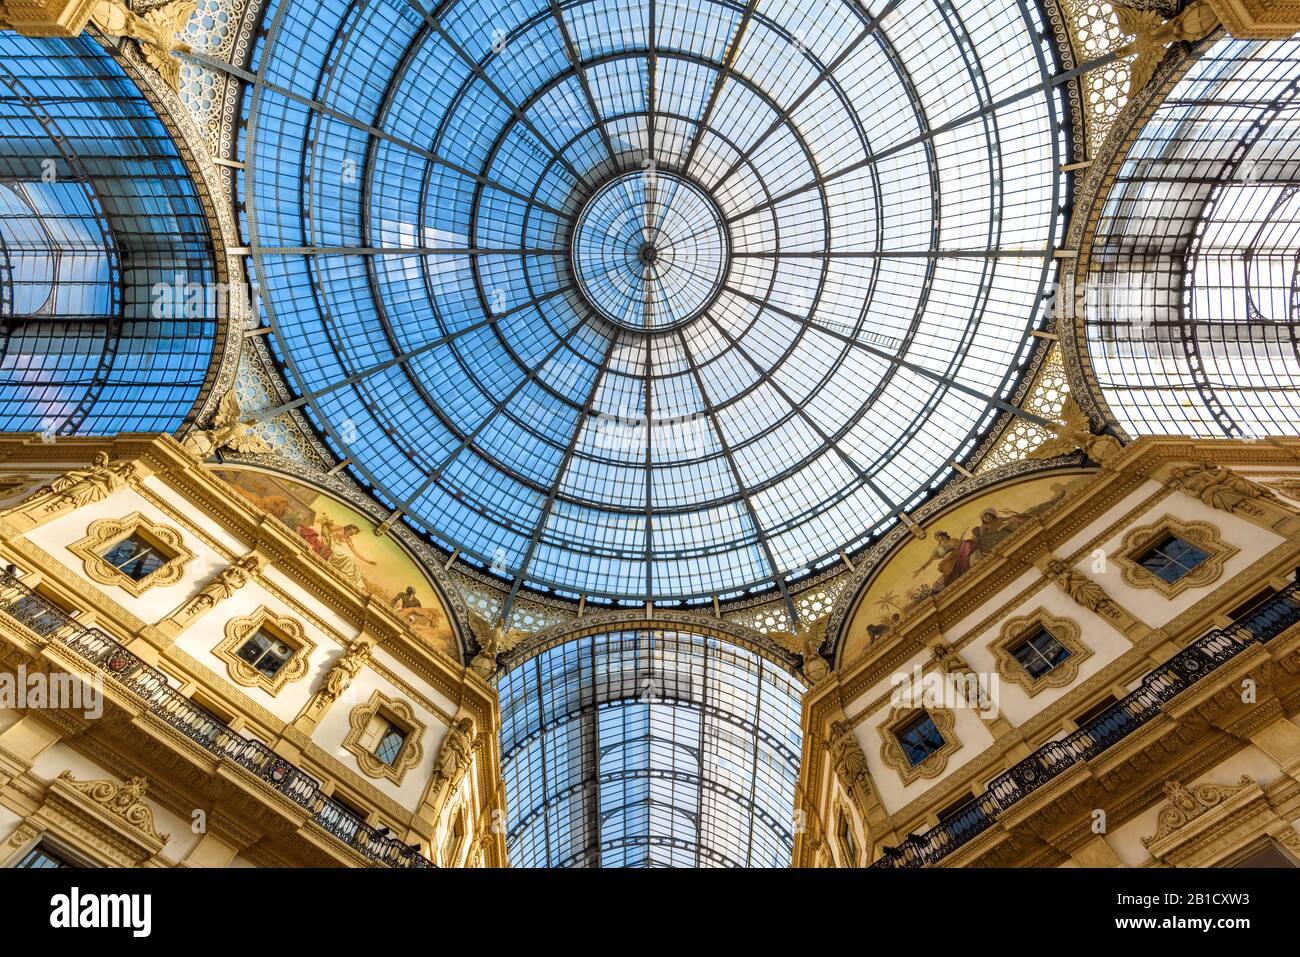 Glass dome of Galleria Vittorio Emanuele II in central Milan, Italy. This gallery is one of the world's oldest shopping malls and tourist attraction o Stock Photo